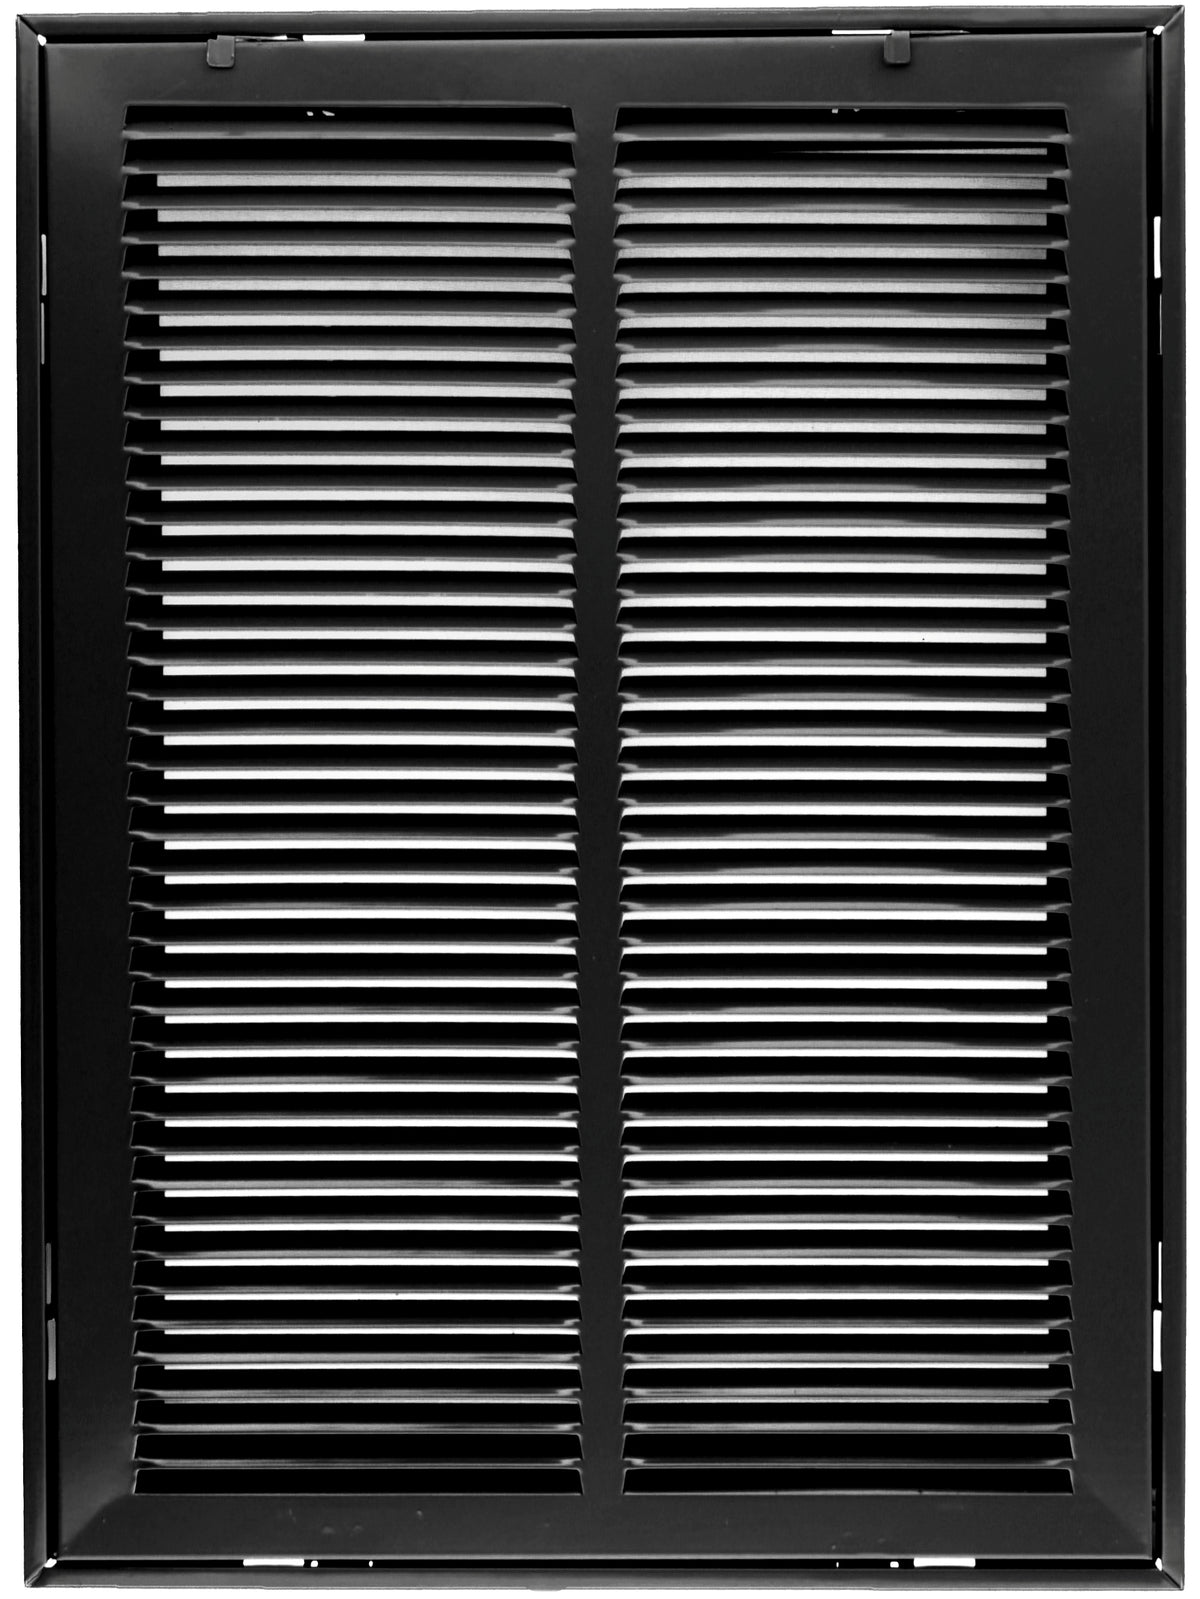 20&quot; X 30&quot; Steel Return Air Filter Grille for 1&quot; Filter - Removable Frame - Black - [Outer Dimensions: 22 5/8&quot; X 32 5/8&quot;]